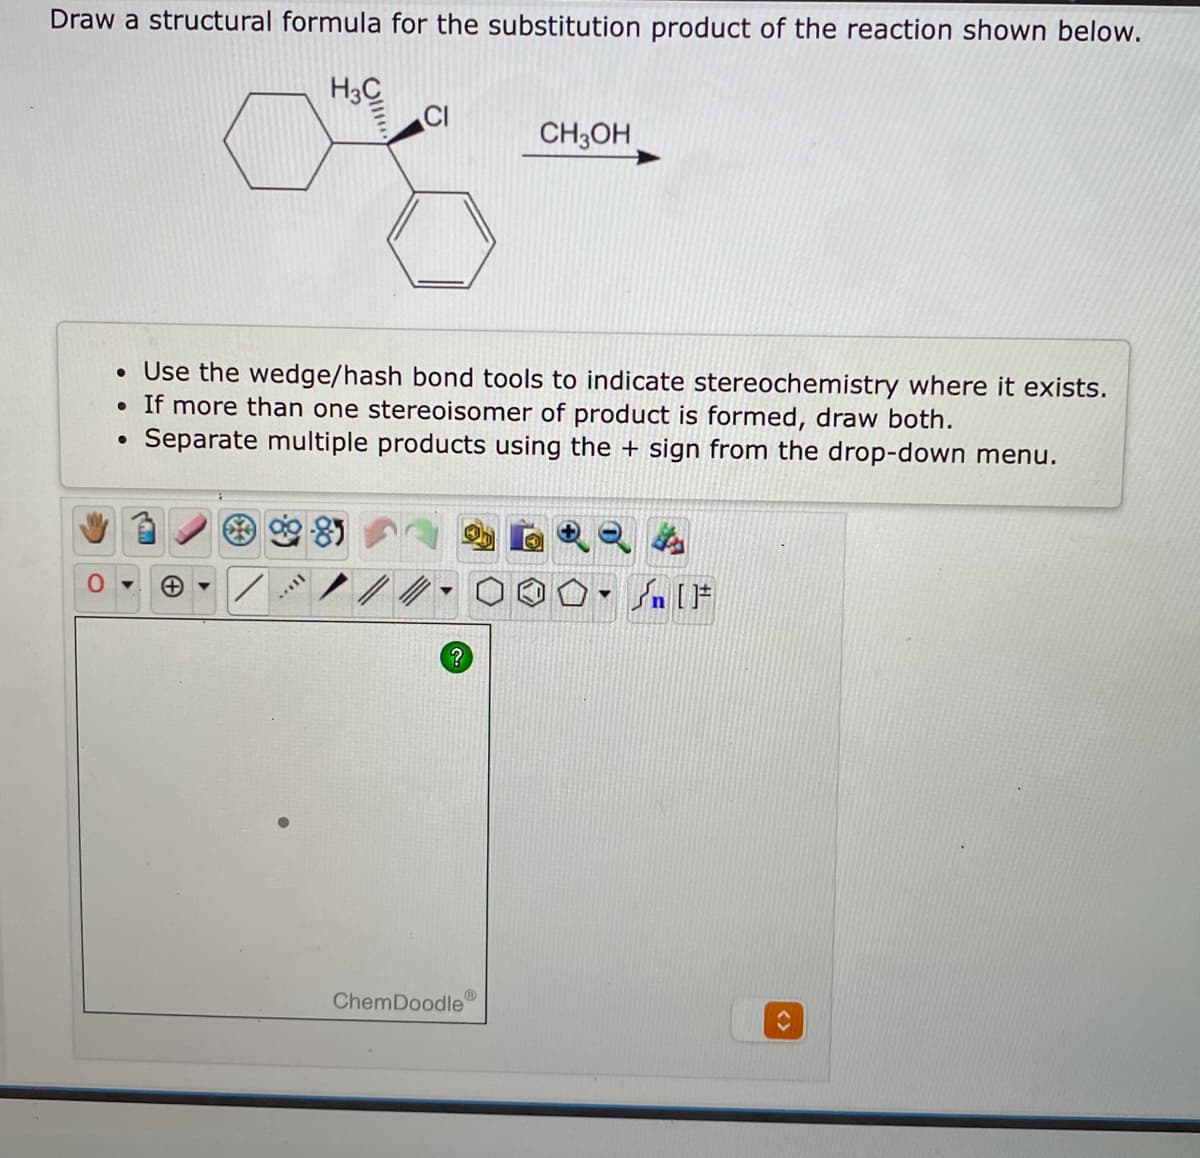 Draw a structural formula for the substitution product of the reaction shown below.
H3C
CI
CH3OH
• Use the wedge/hash bond tools to indicate stereochemistry where it exists.
• If more than one stereoisomer of product is formed, draw both.
Separate multiple products using the + sign from the drop-down menu.
ChemDoodle
<>
